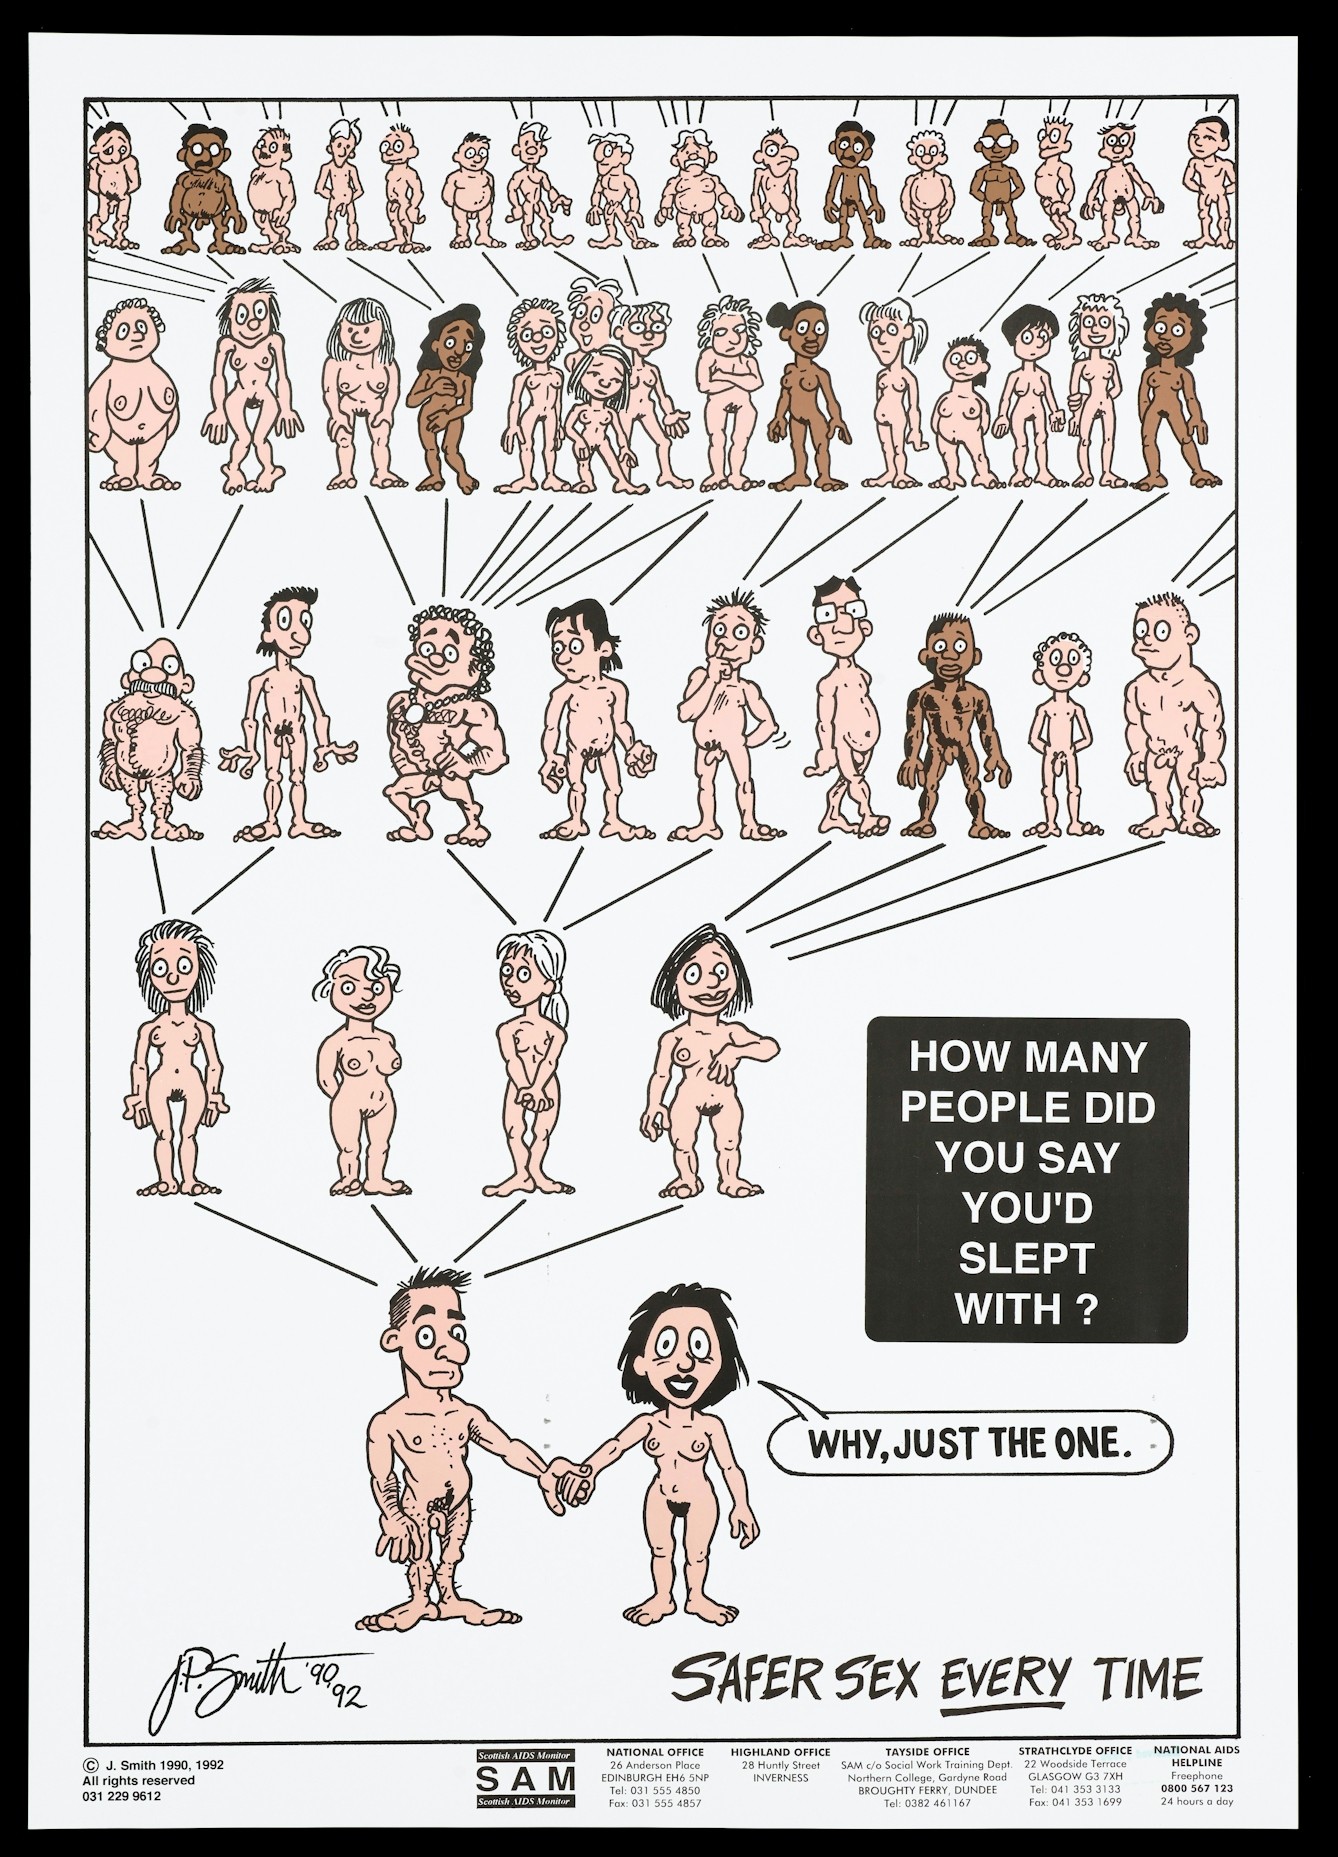 Numerous naked figures laid out in the form of a family tree. Lettering says: How many people did you say you slept with? The woman responds, "Why, just the one."